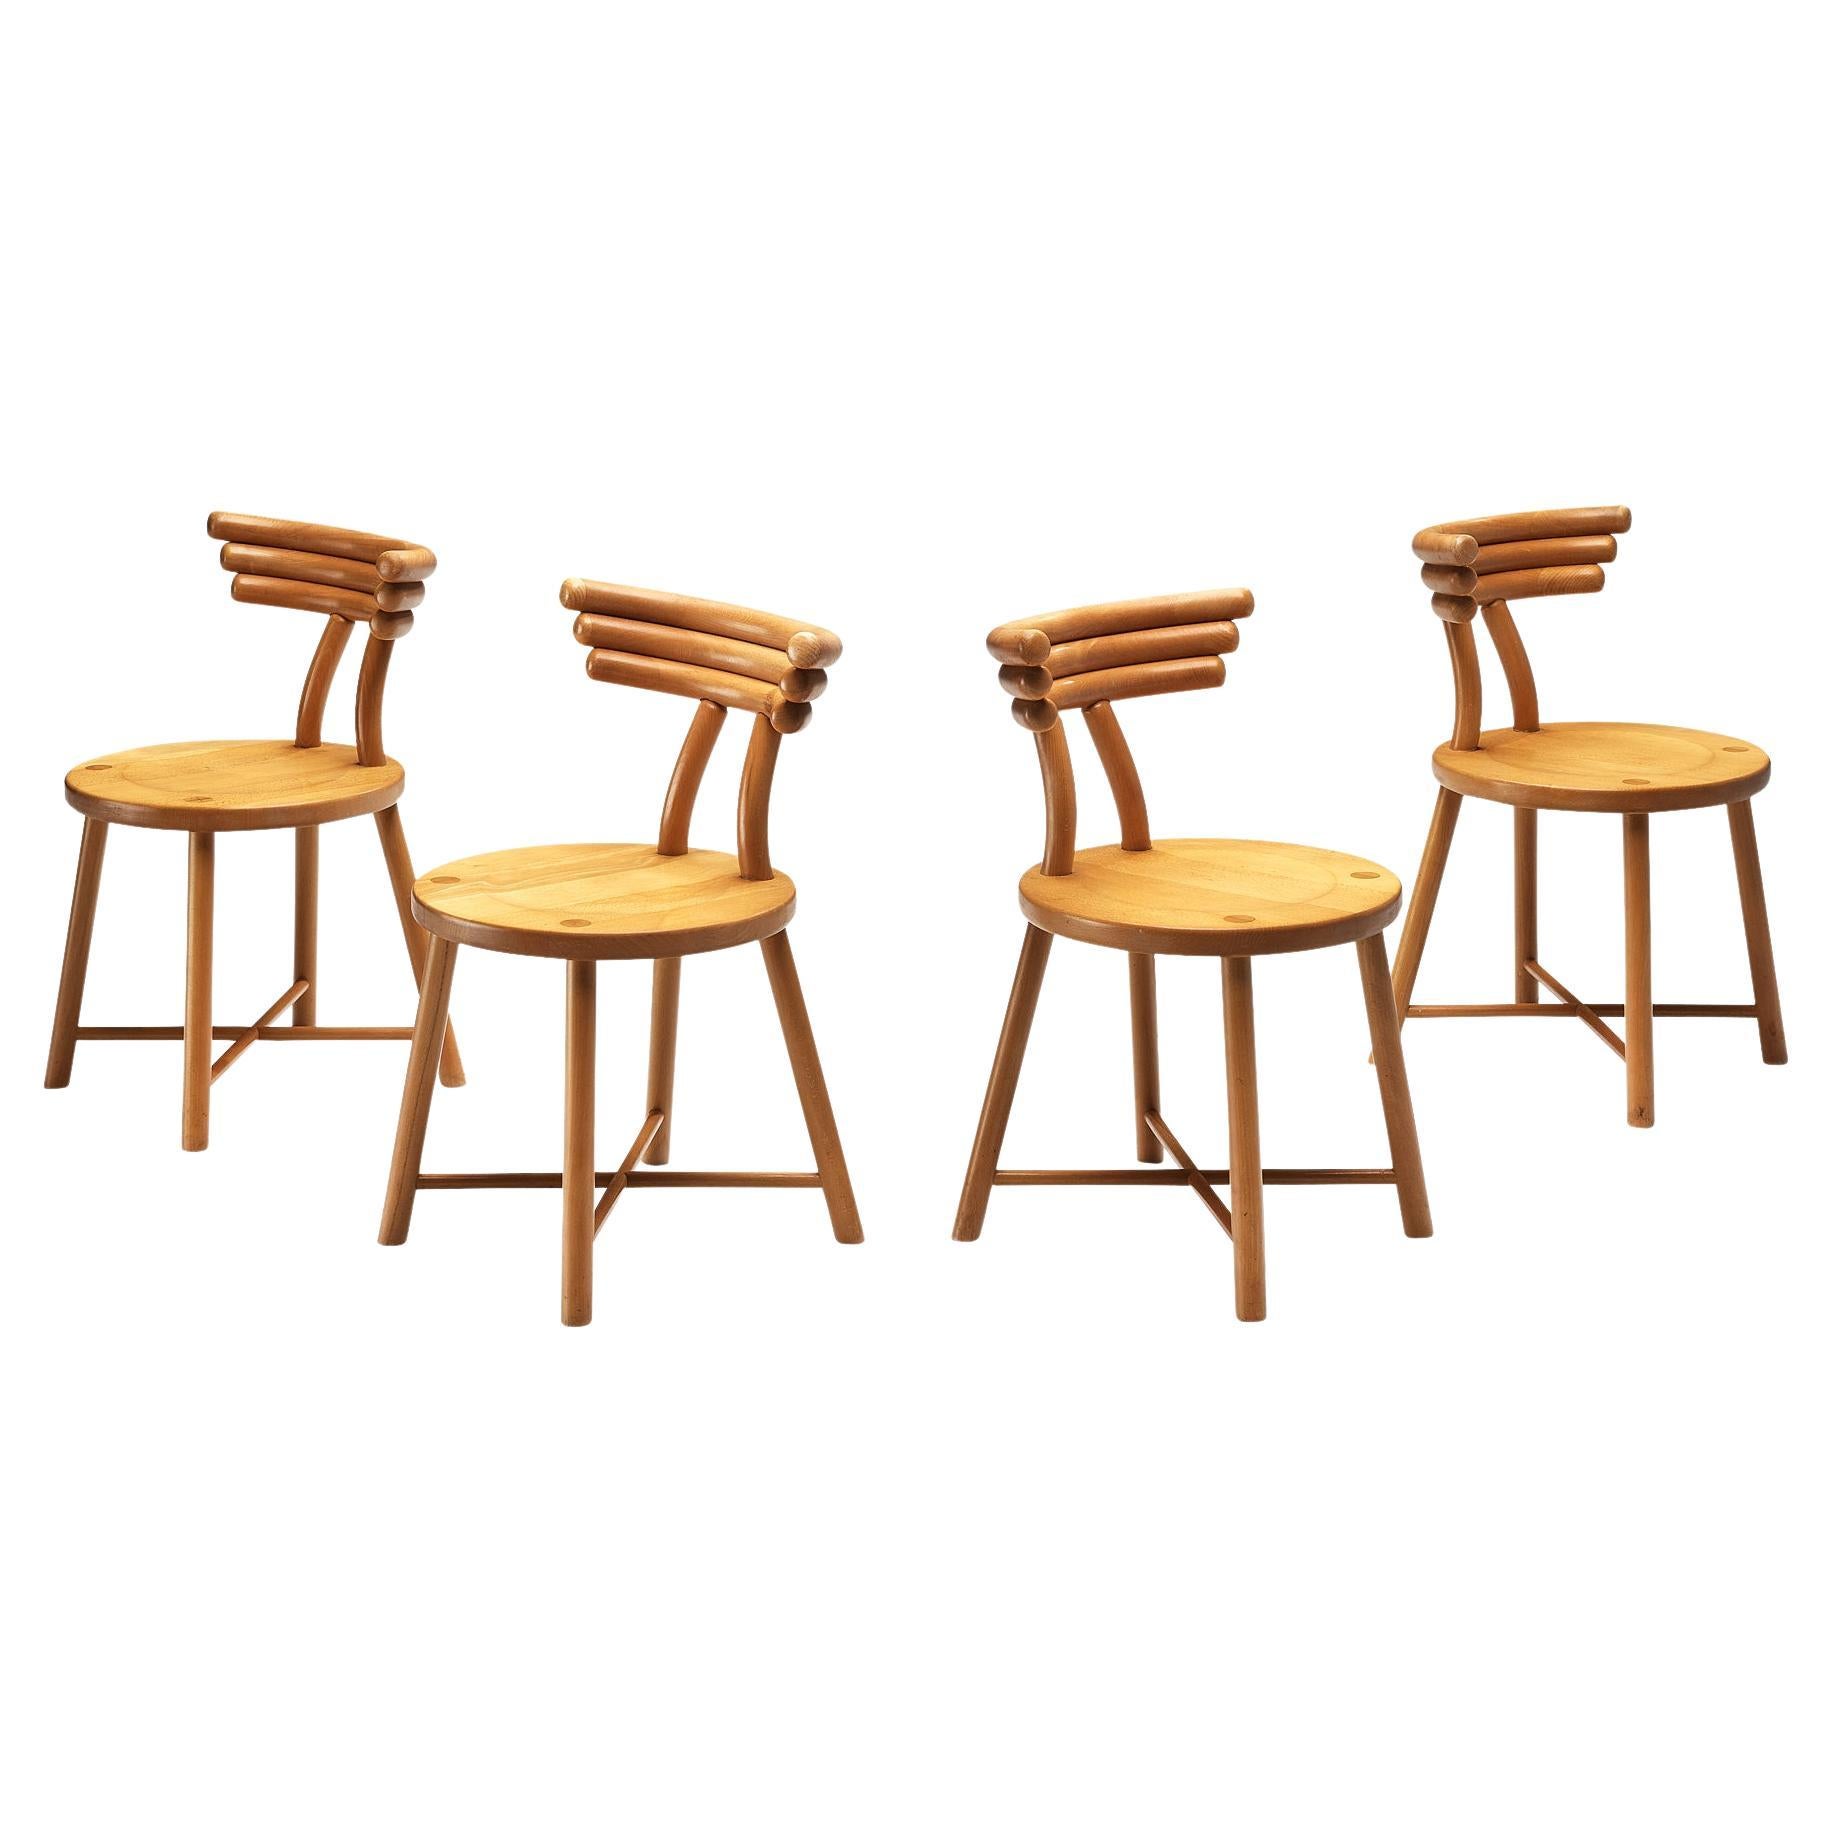 Set of Four Modern Dining Chairs With Round Backrests